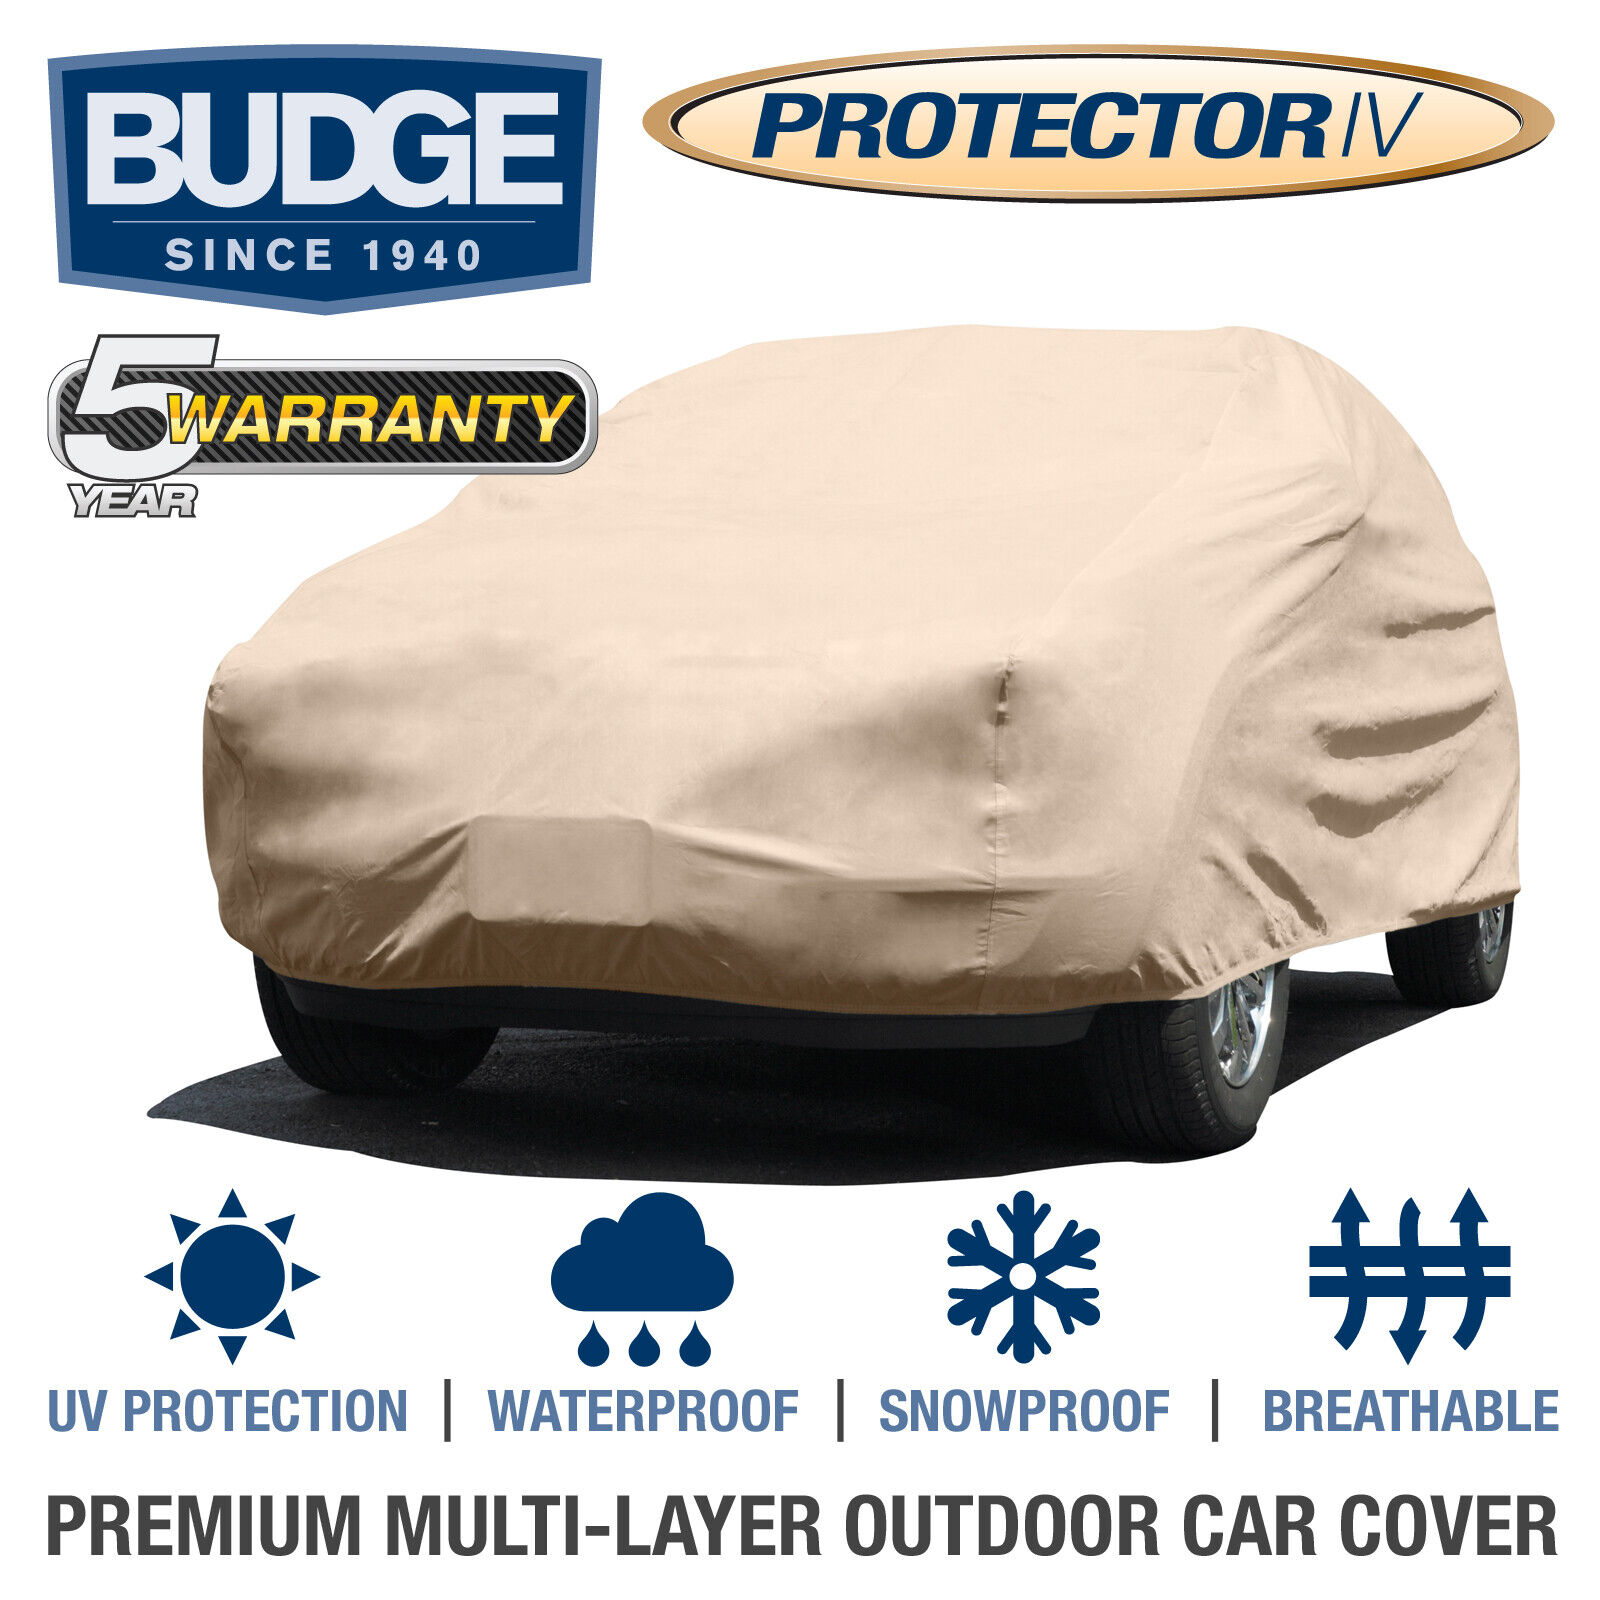 Budge Protector IV SUV Cover Fits Ford Explorer 2001 | Waterproof | Breathable